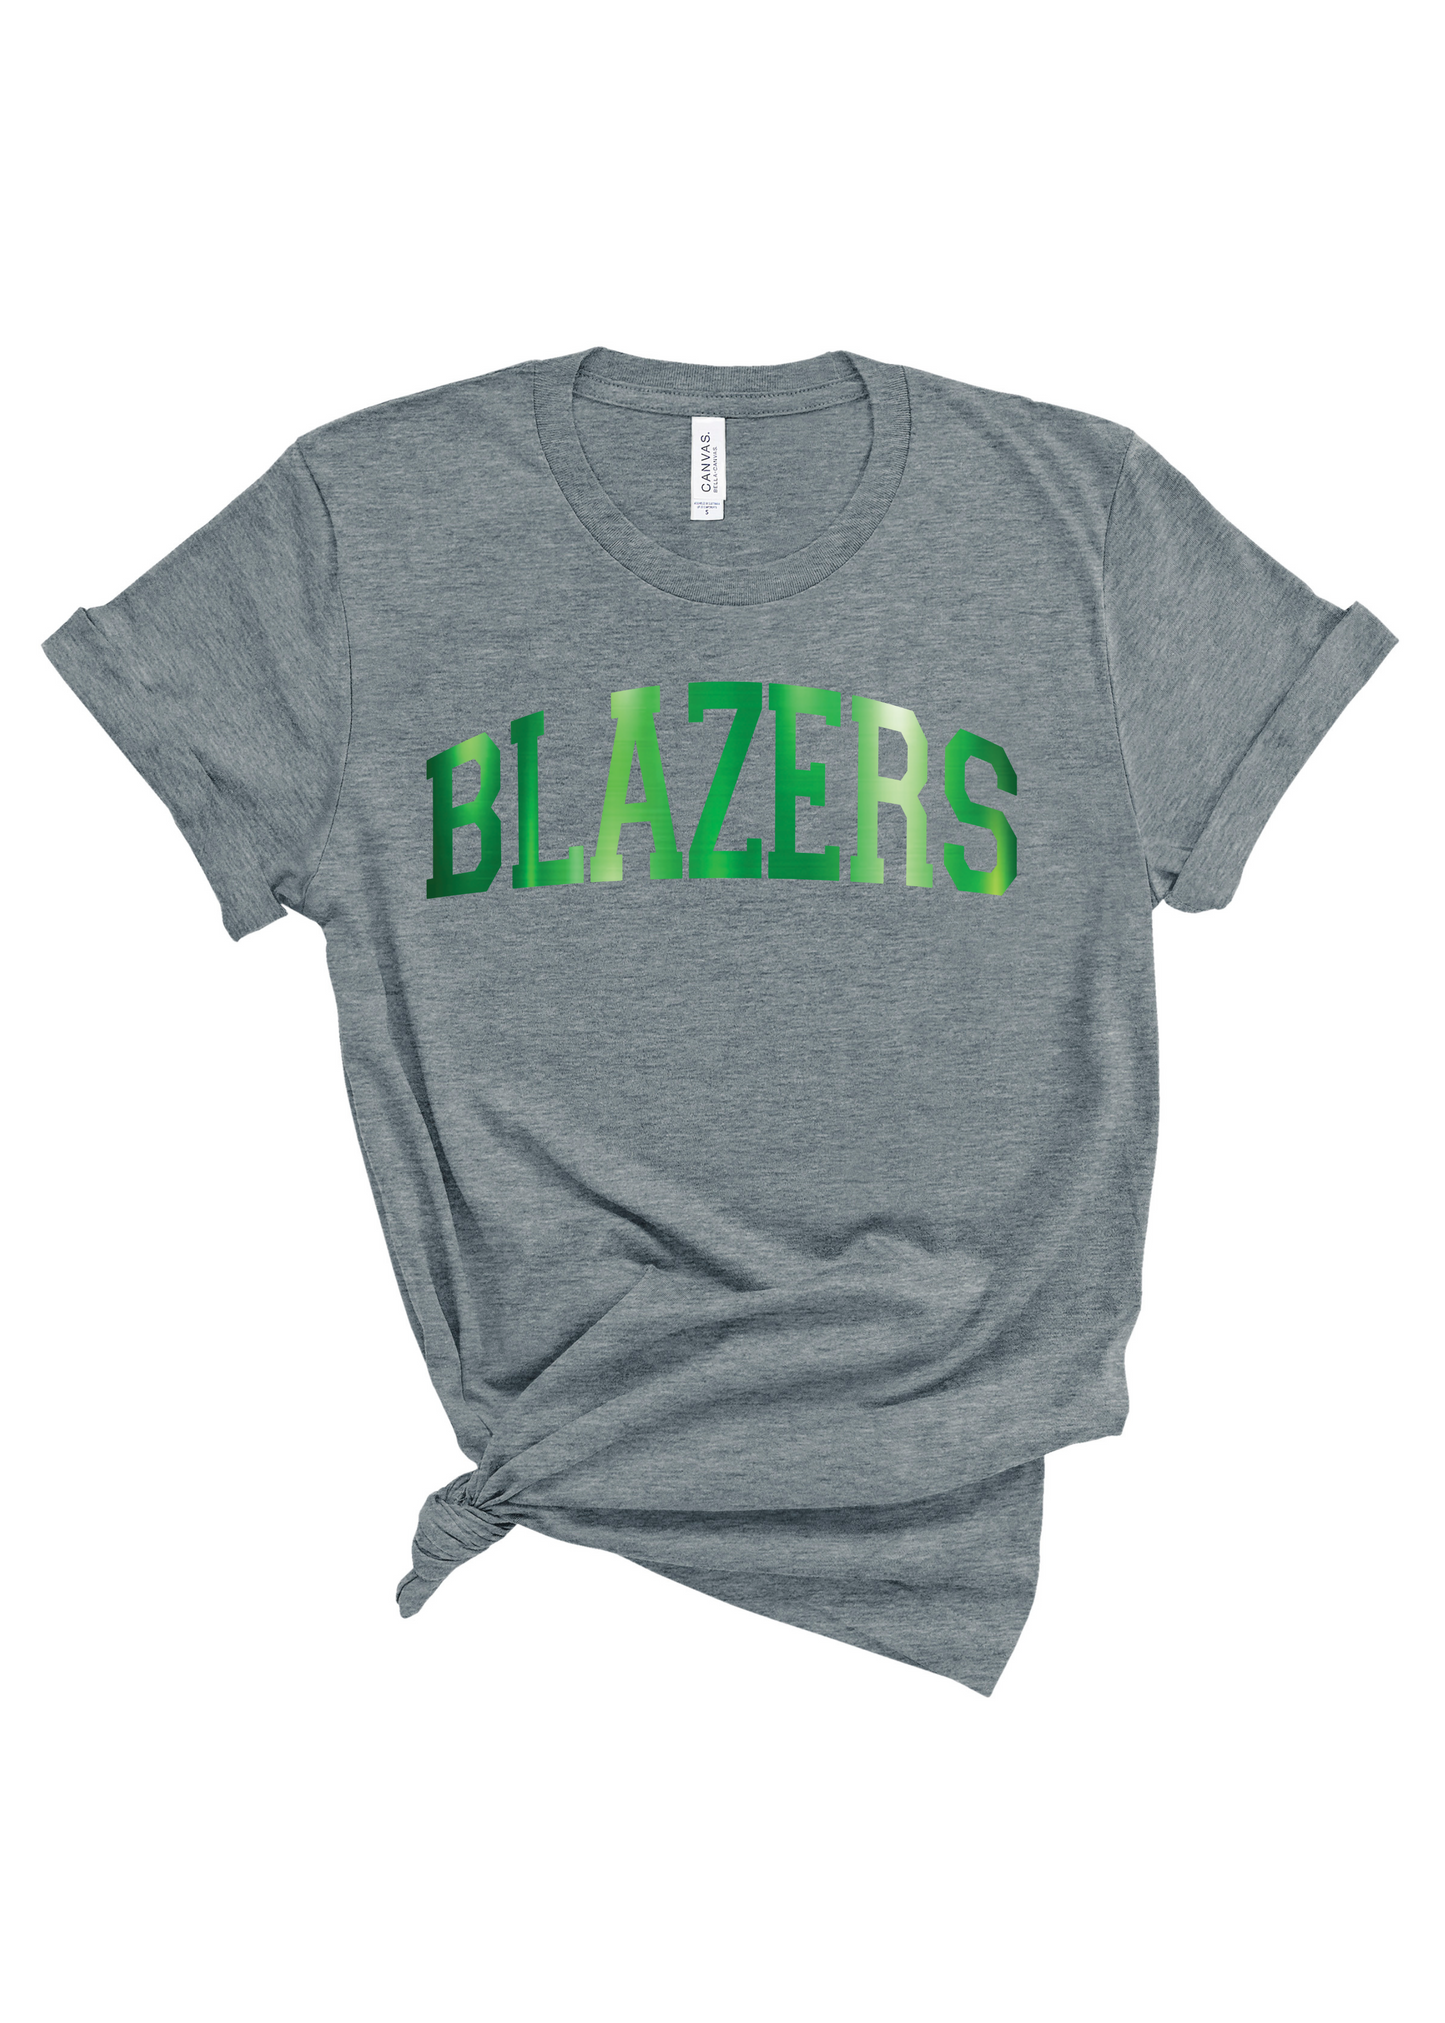 Blazers Foil | Adult Tee-Adult Tee-Sister Shirts-Sister Shirts, Cute & Custom Tees for Mama & Littles in Trussville, Alabama.